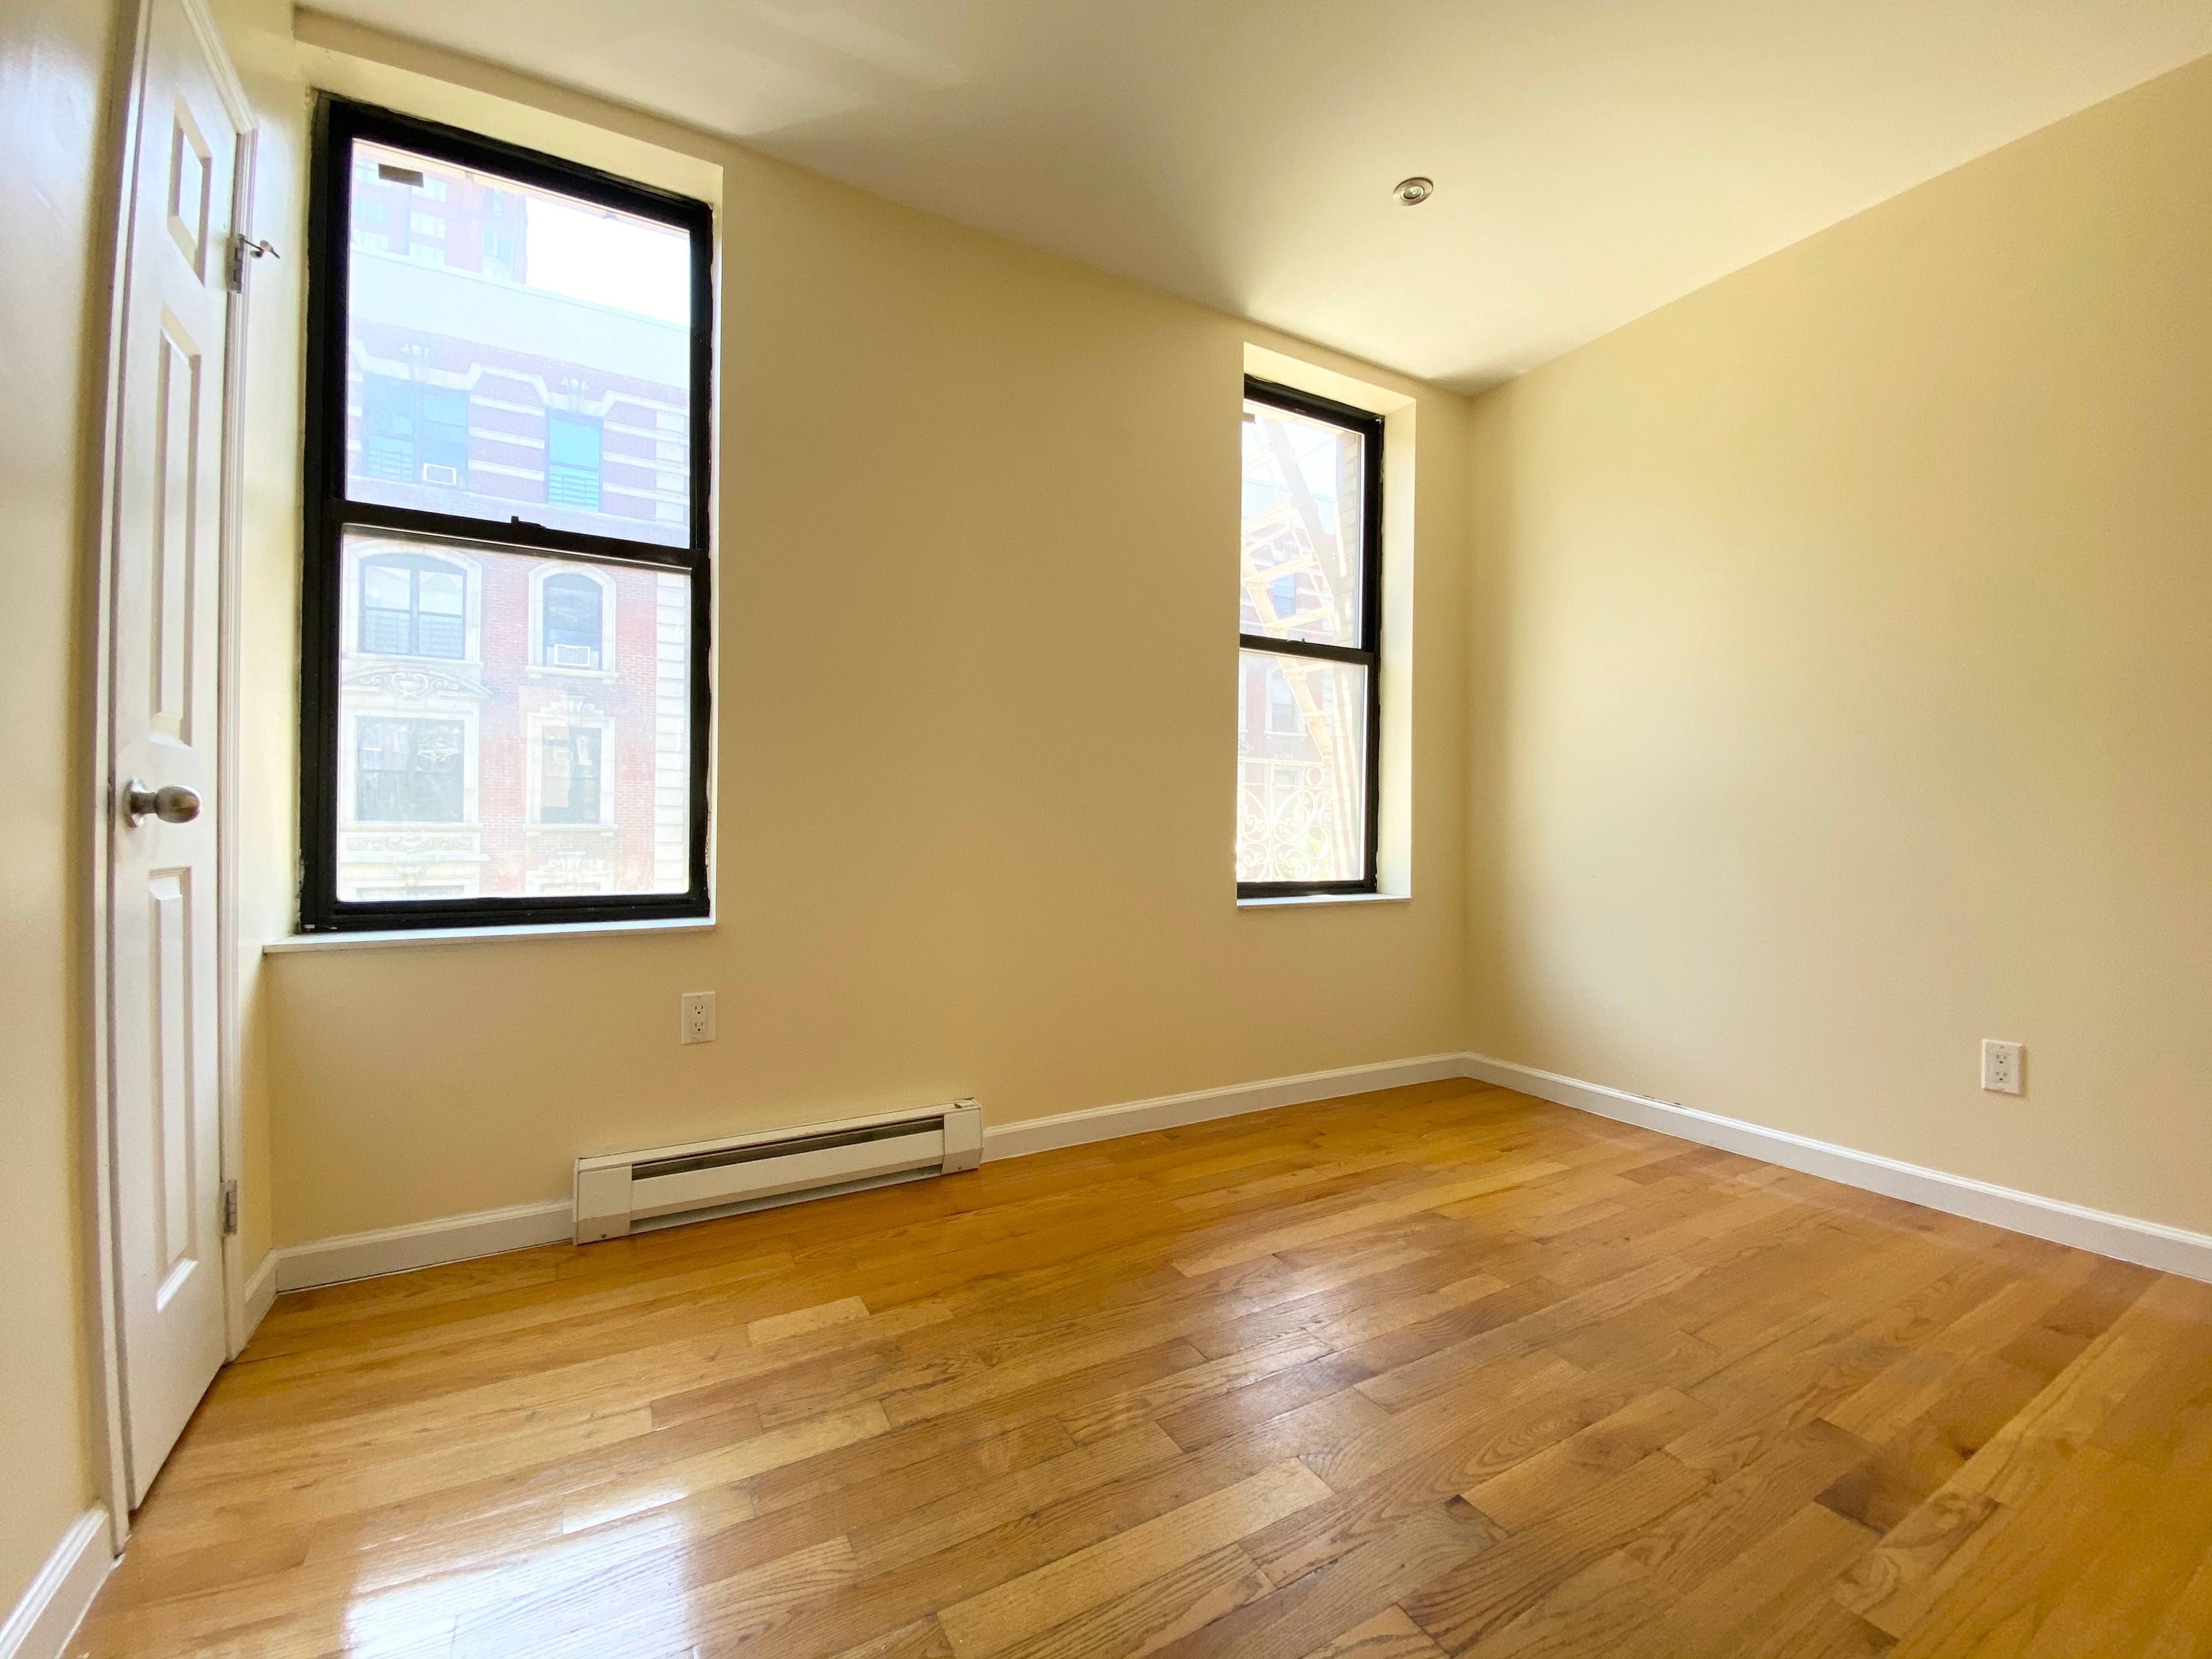 Upper West Side 5bedroom located up the block from Central Park and Columbia University in a well maintained elevator laundry building.